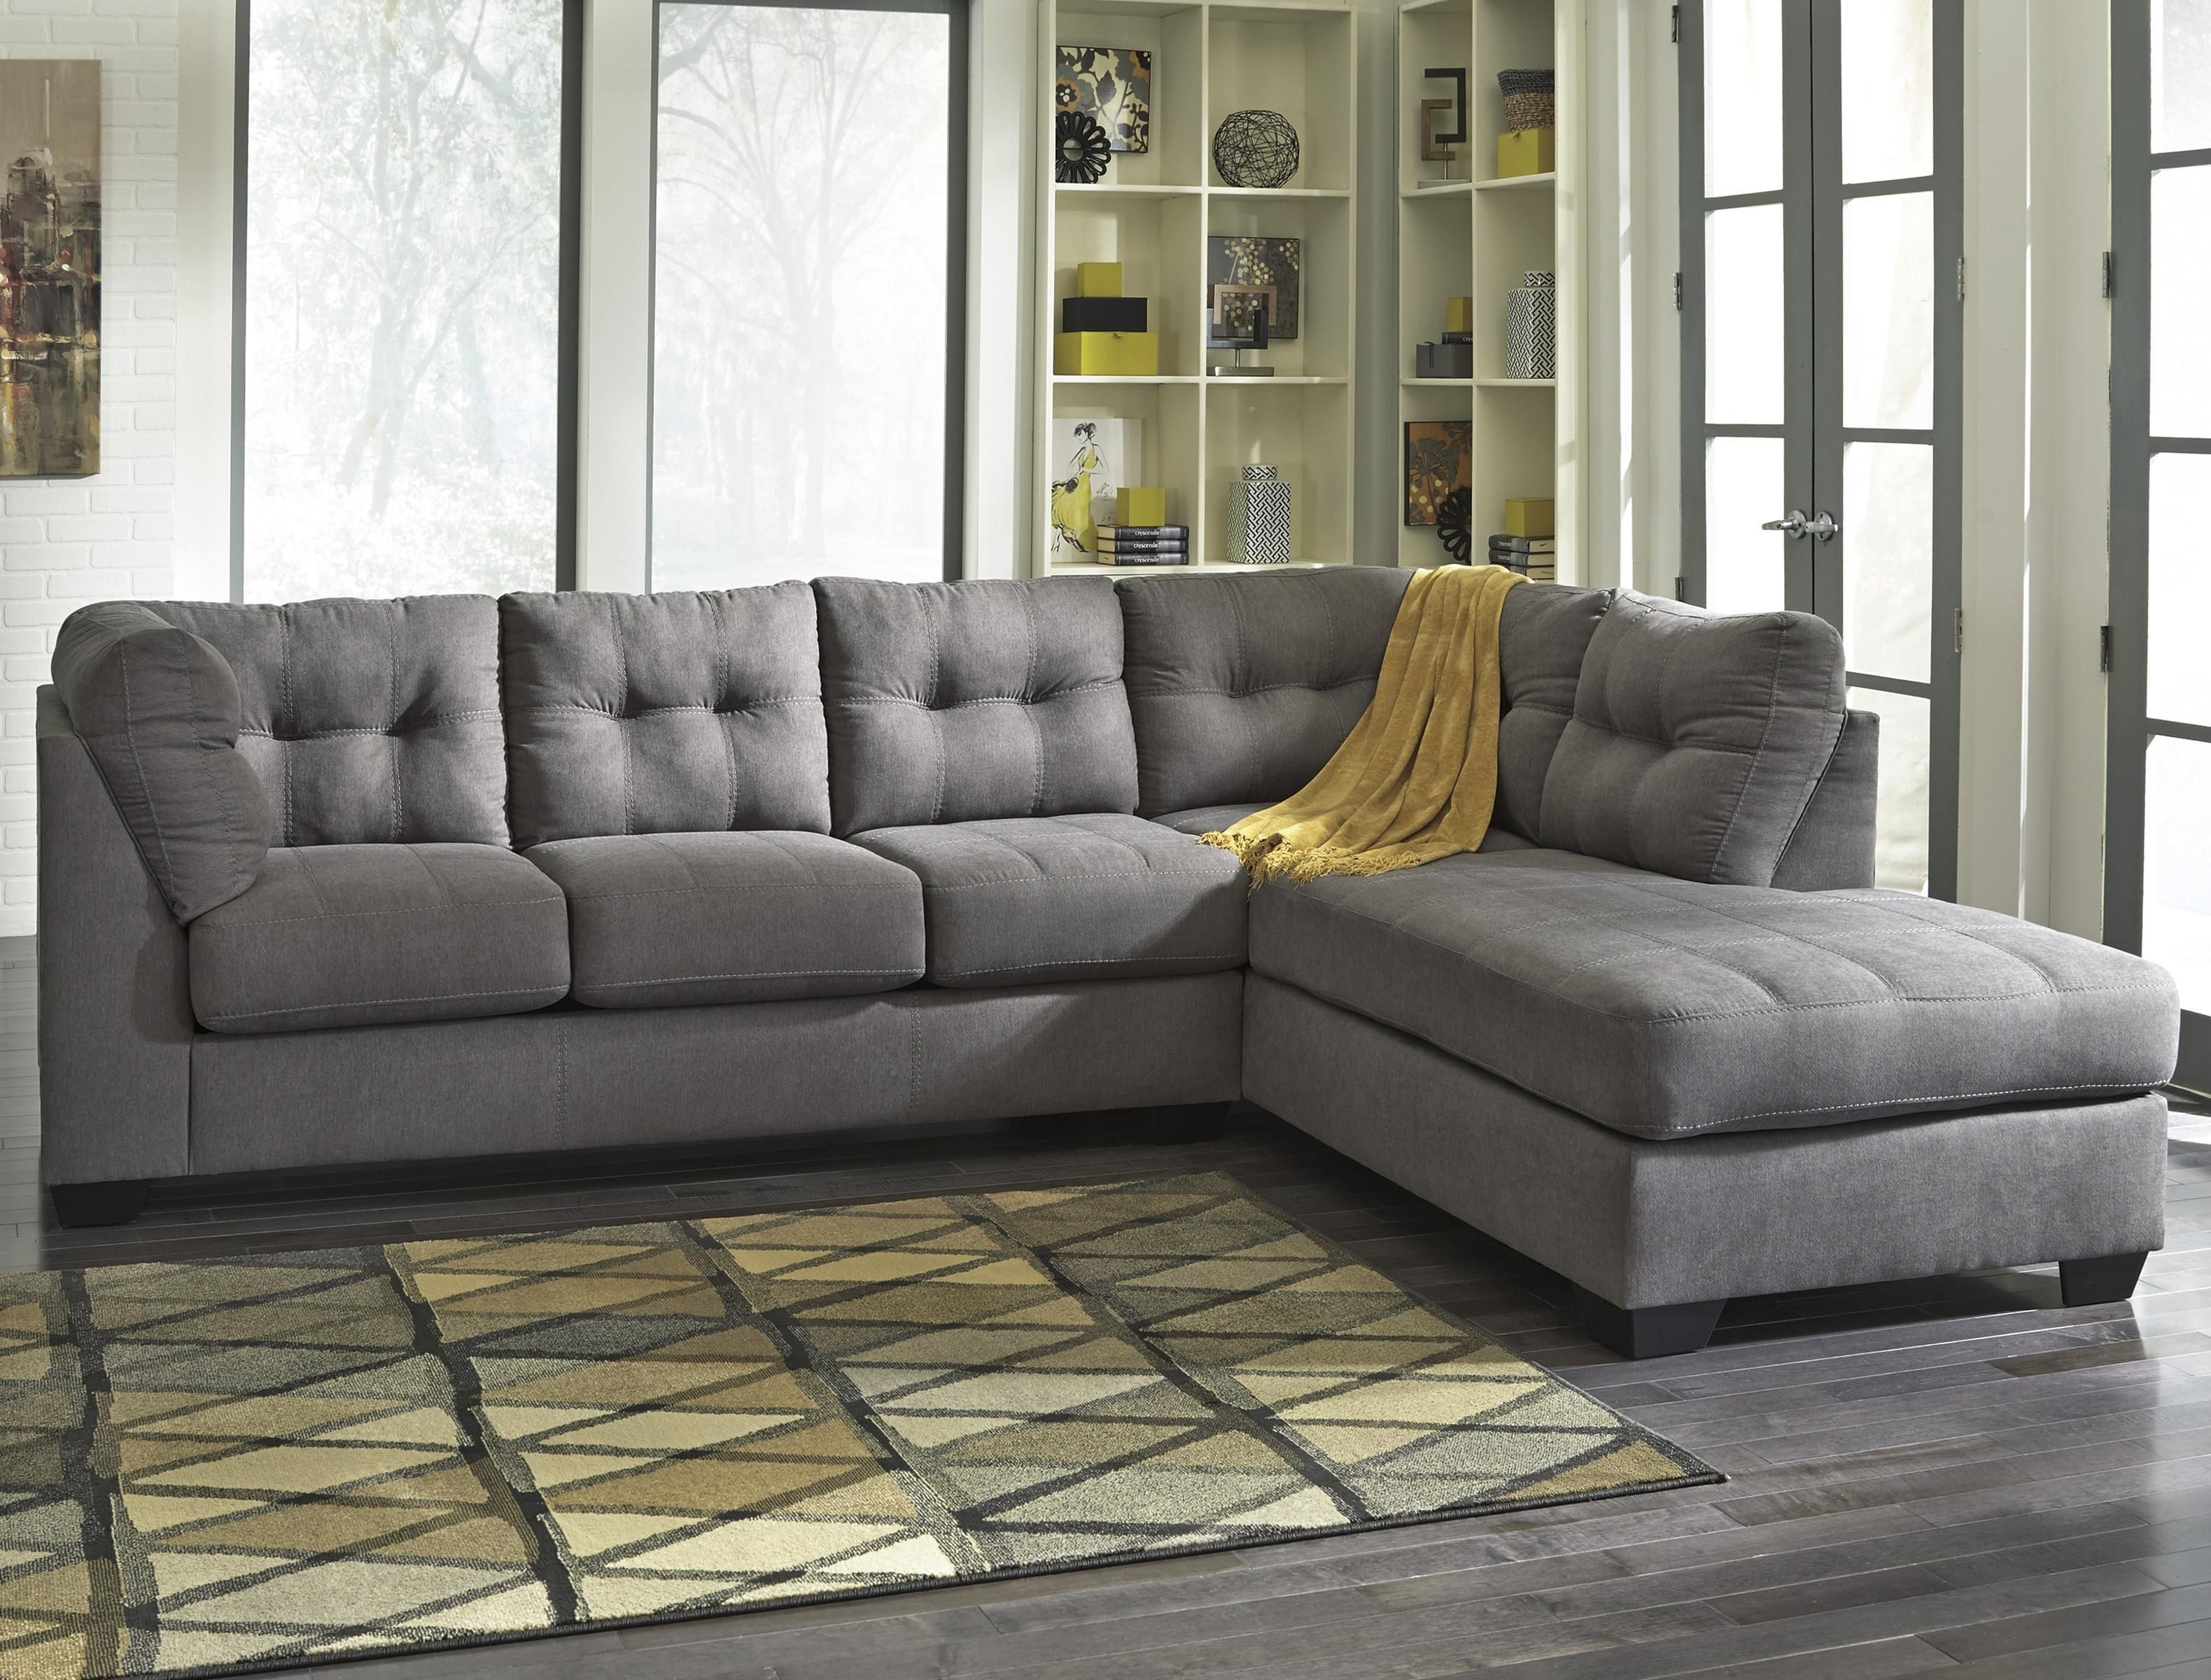 Benchcraft Maier – Charcoal 2 Piece Sectional W/ Sleeper Sofa Pertaining To Arrowmask 2 Piece Sectionals With Raf Chaise (View 2 of 25)